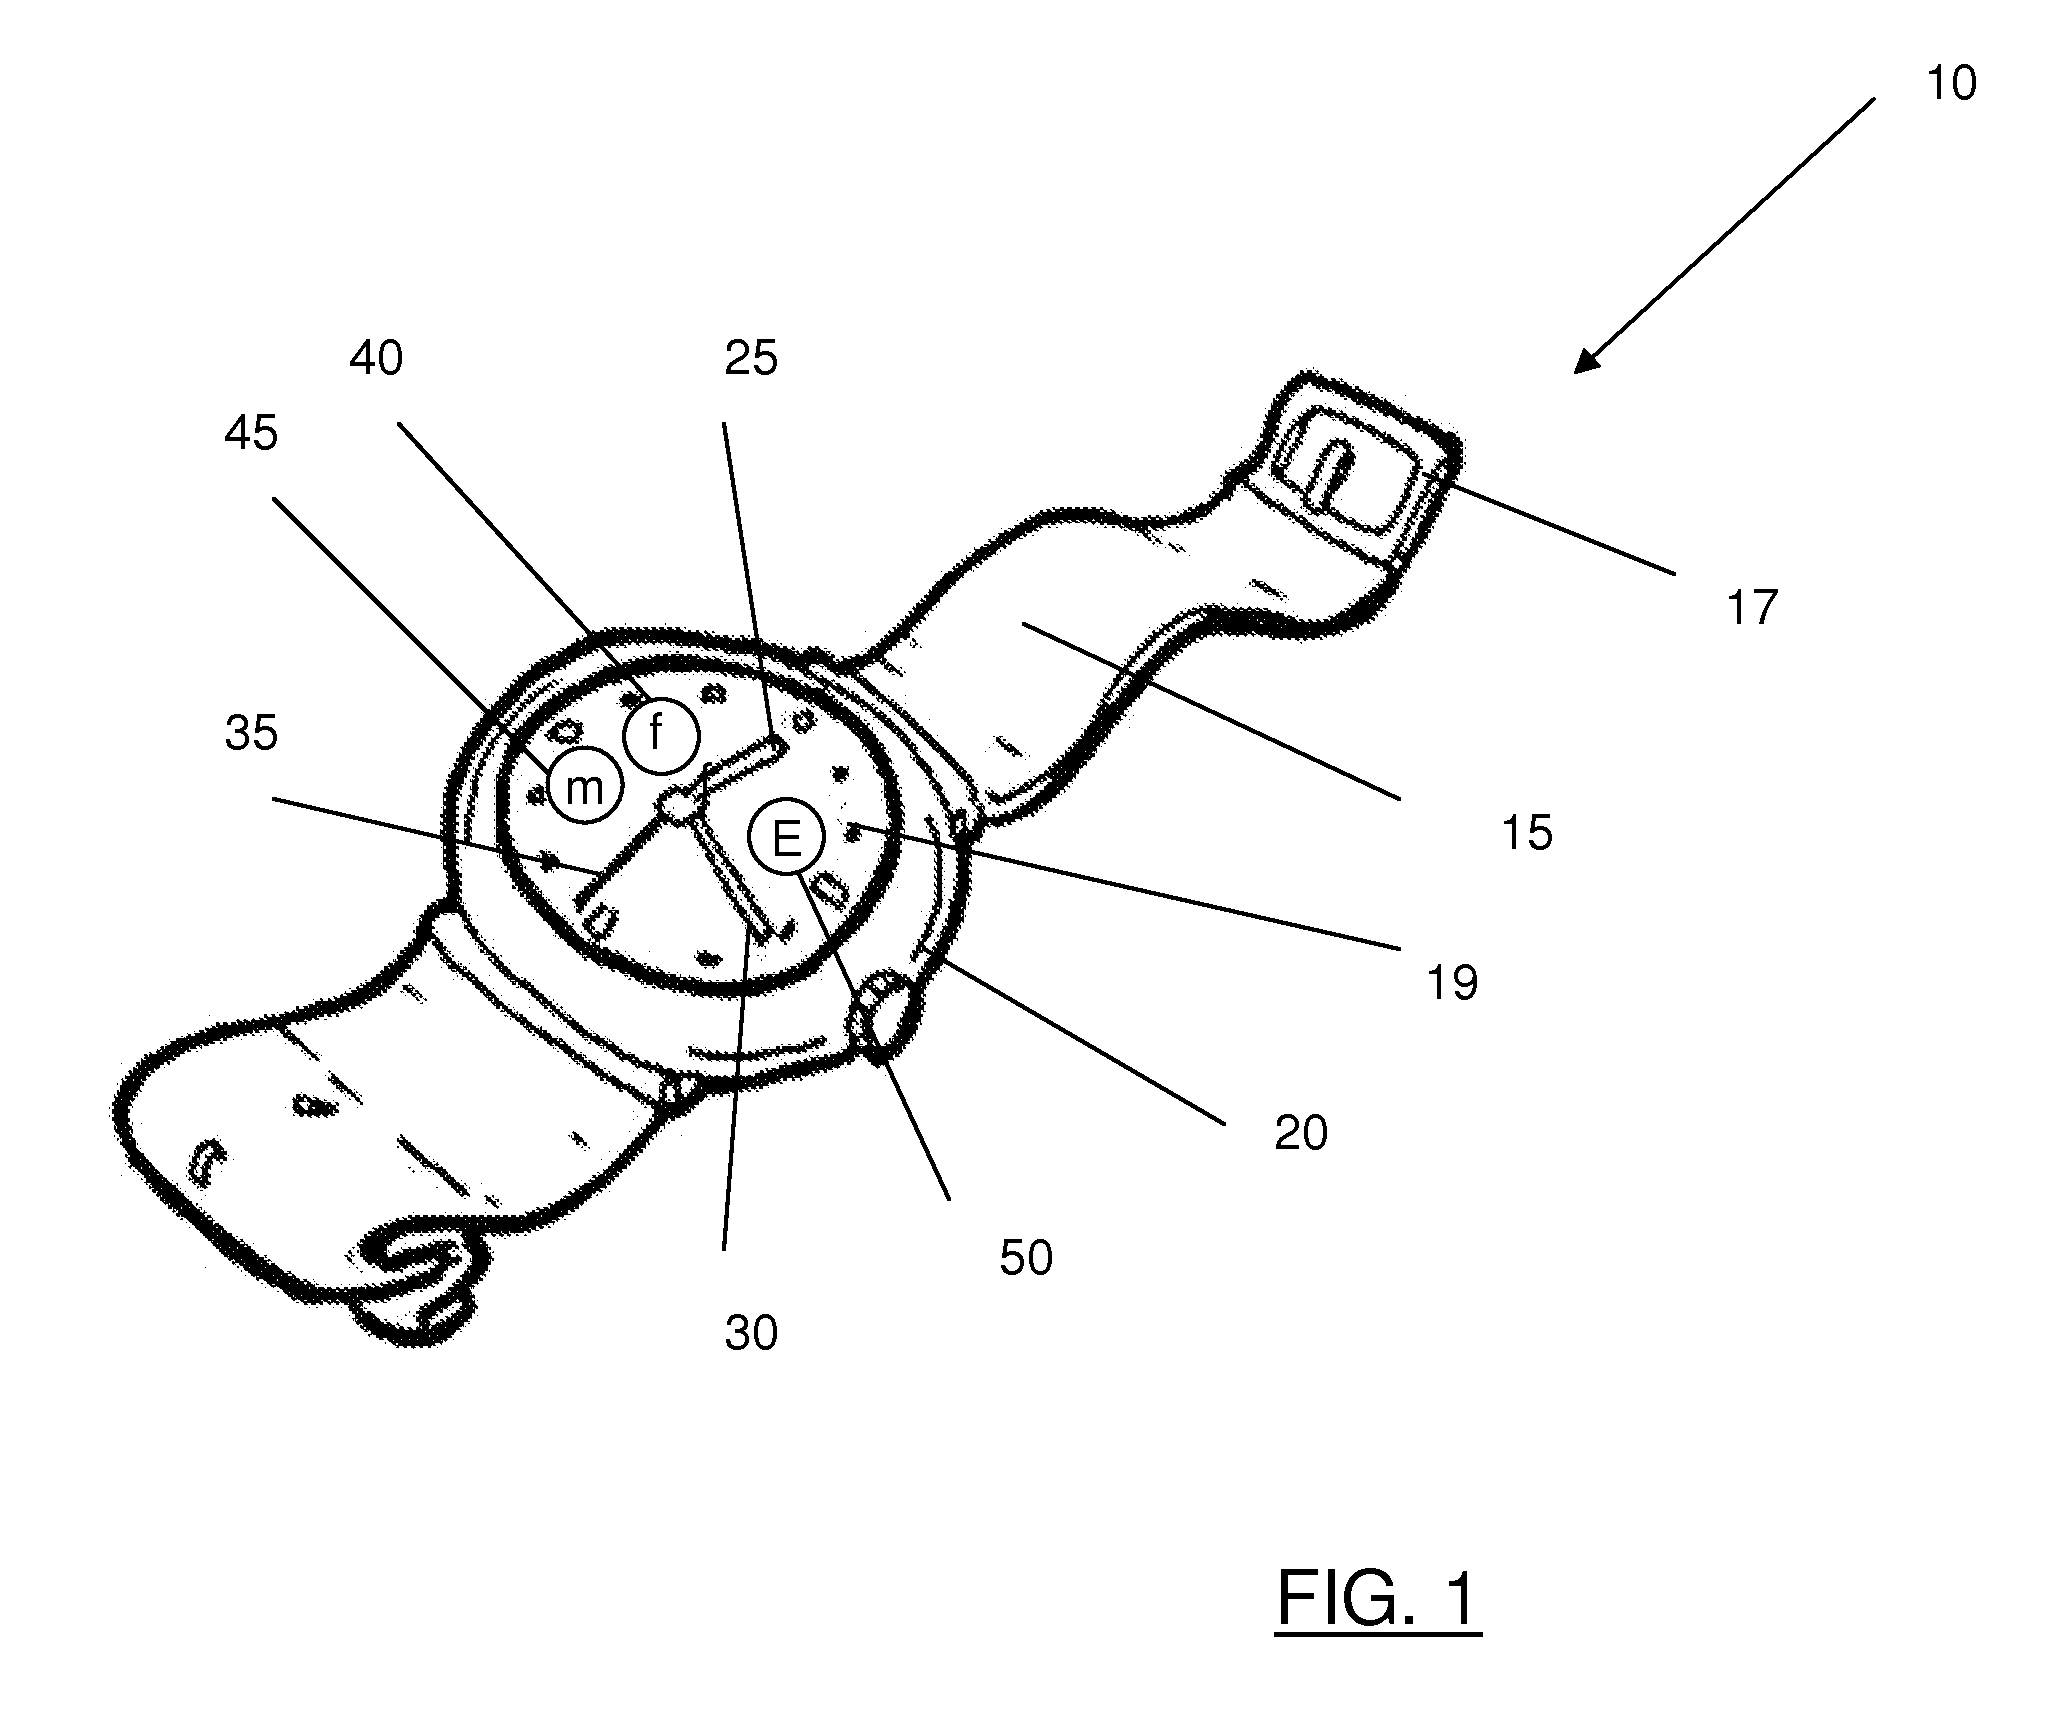 Personal locator device for a child having an integrated mobile communication device that qualifies to be carried in an educational setting